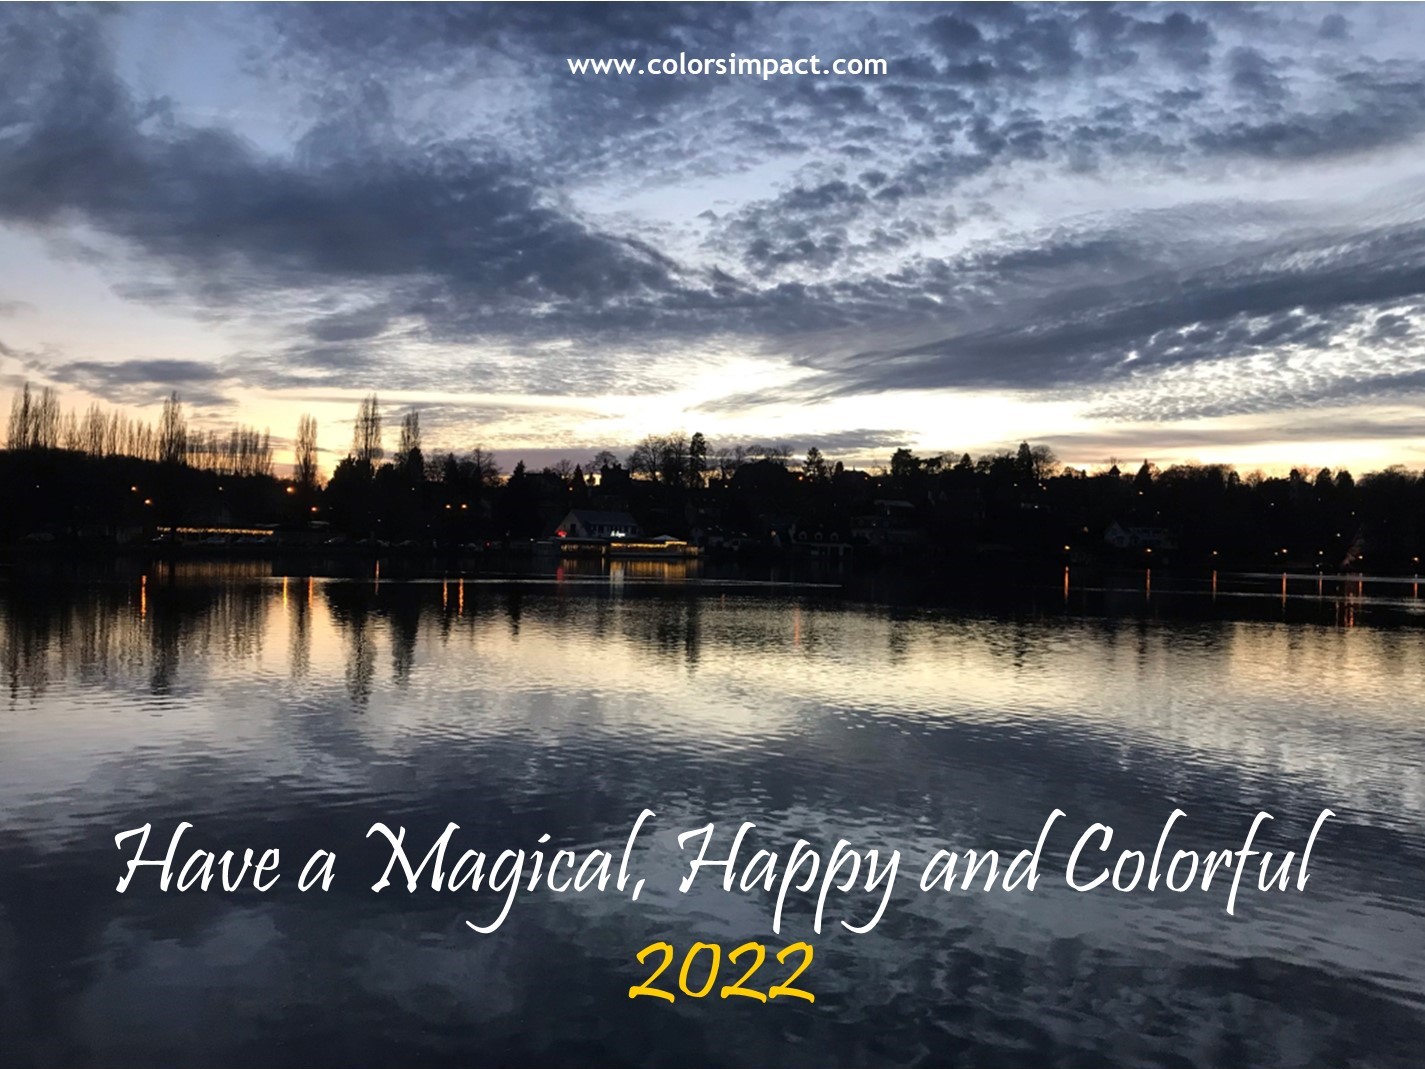 Magical, Happy and Colorful year 2022 from Dominique Latteur Colors Impact